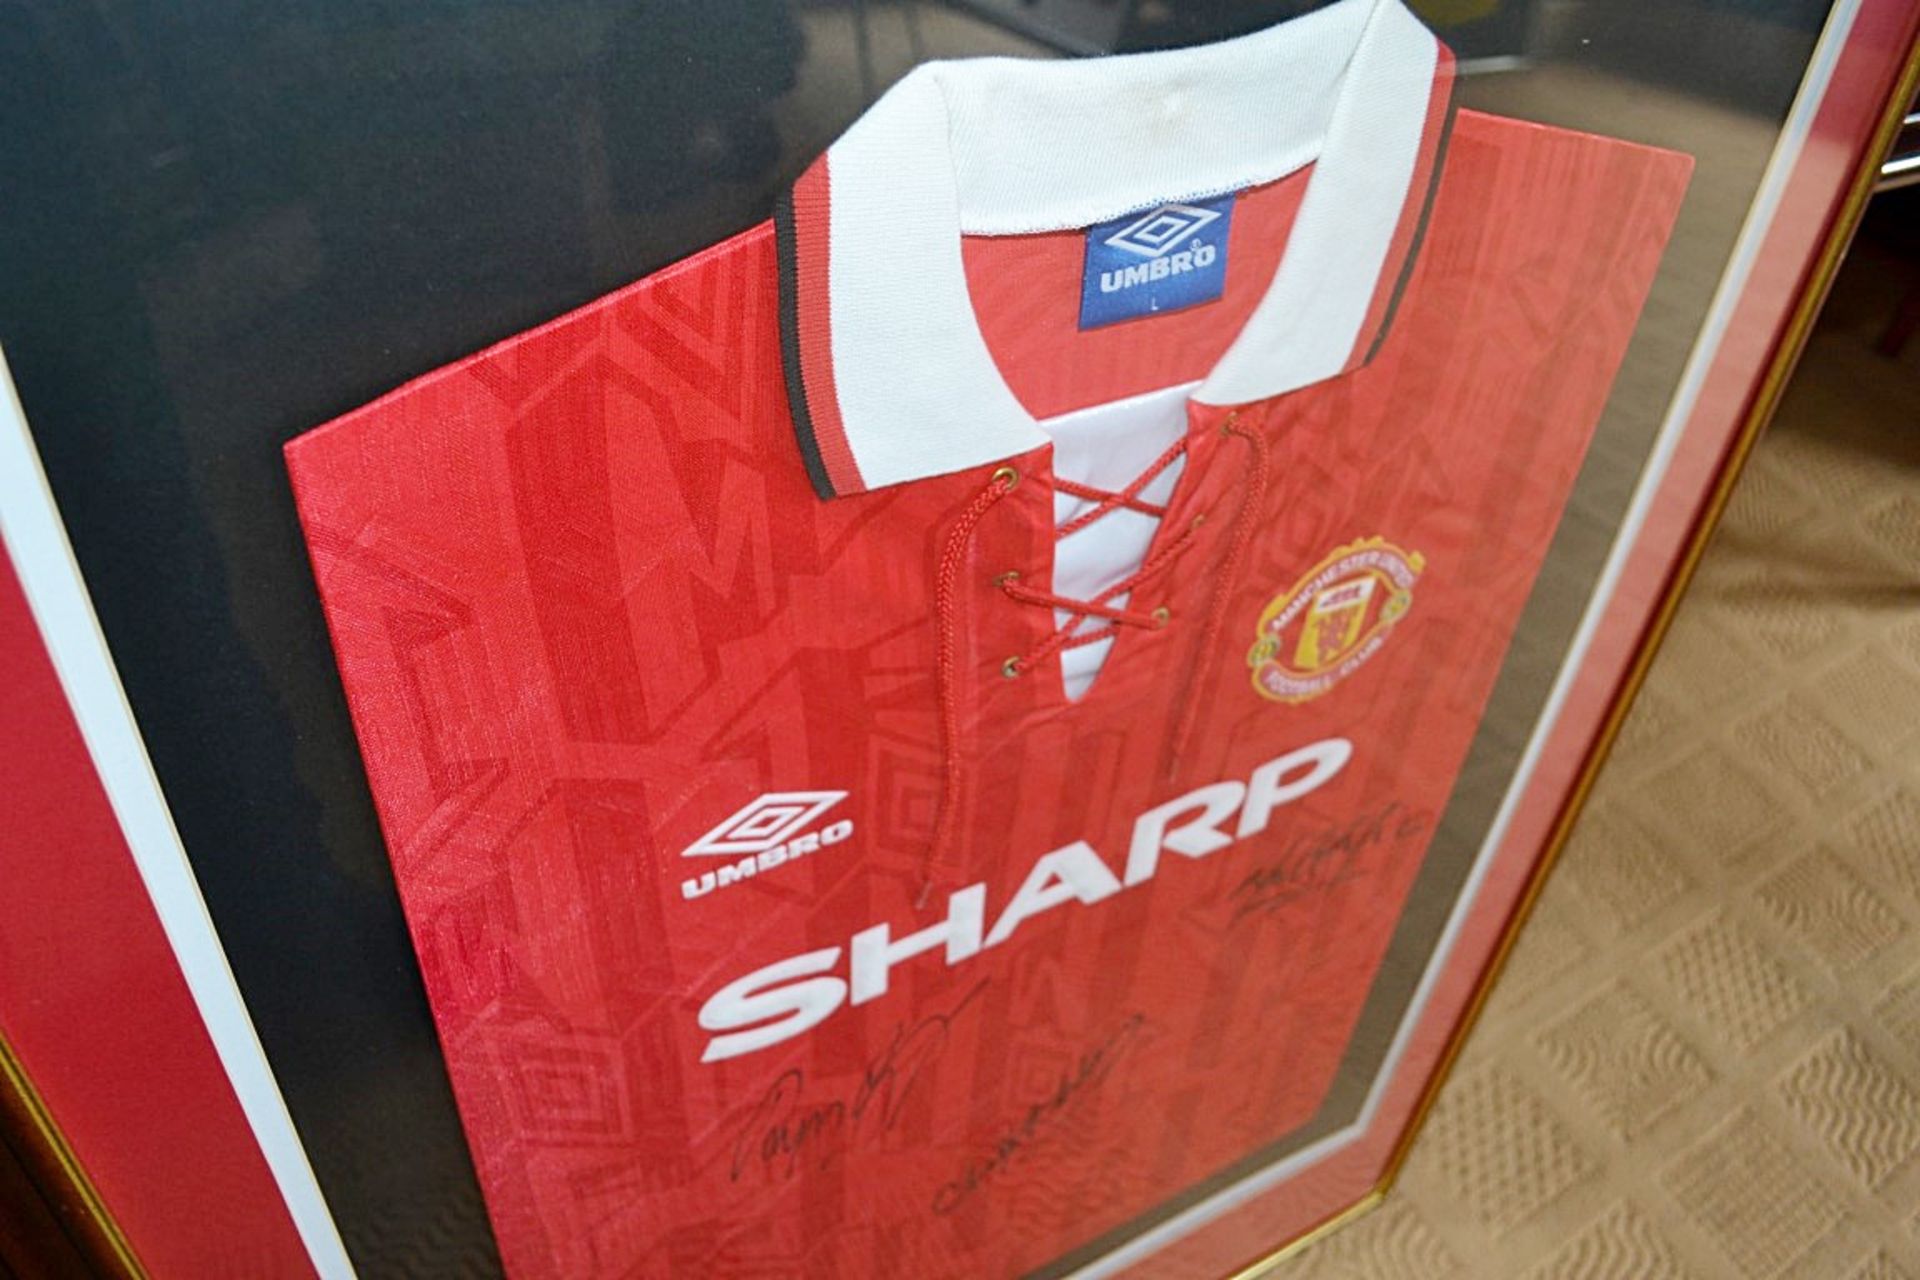 1 x Framed And Mounted Ryan Giggs Signed Football Shirt Autographed By 3 Players (Giggs, Hughes - Image 3 of 7